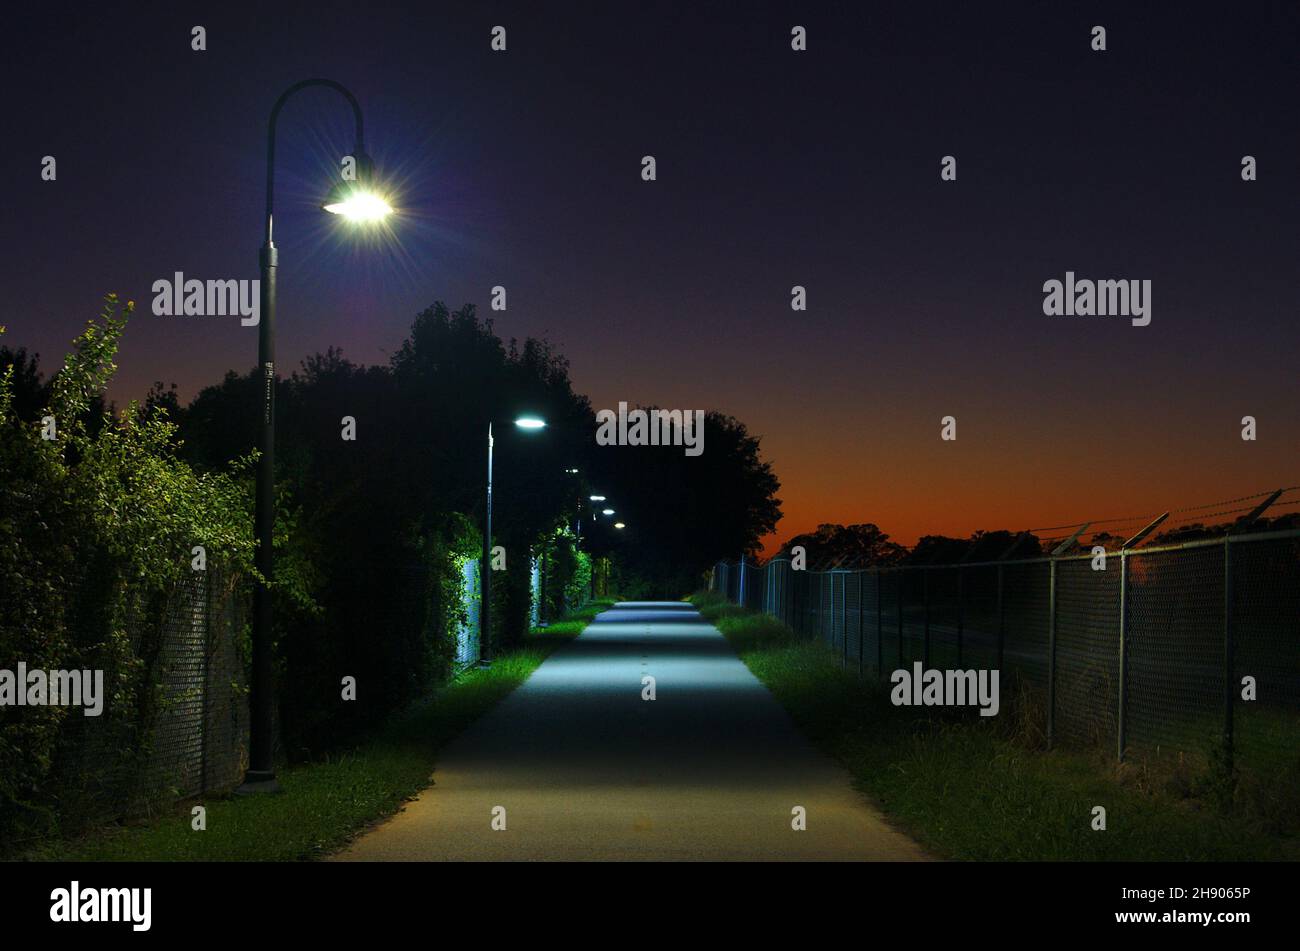 Front view of a trail at night illuminated by streetlights at golden hour with copy space Stock Photo